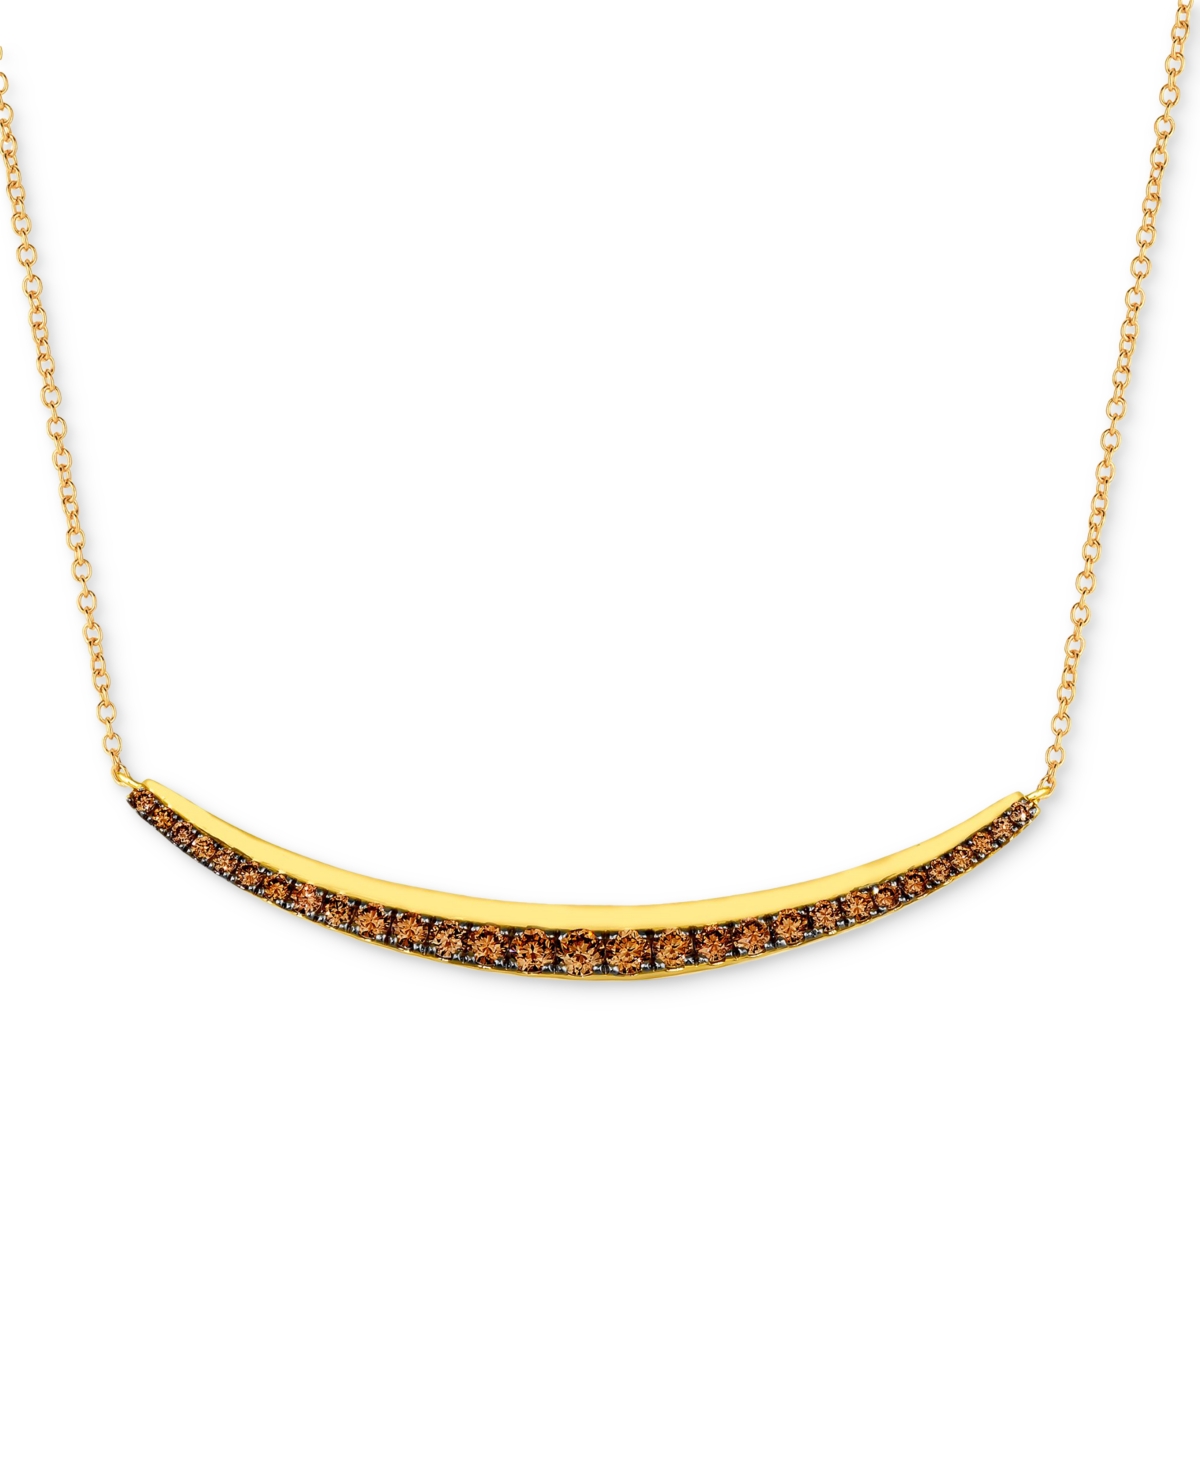 Le Vian Chocolate Diamond Curved Bar 17" Adjustable Collar Necklace (5/8 Ct. T.w.) In 14k Gold In K Honey Gold Adjnecklc